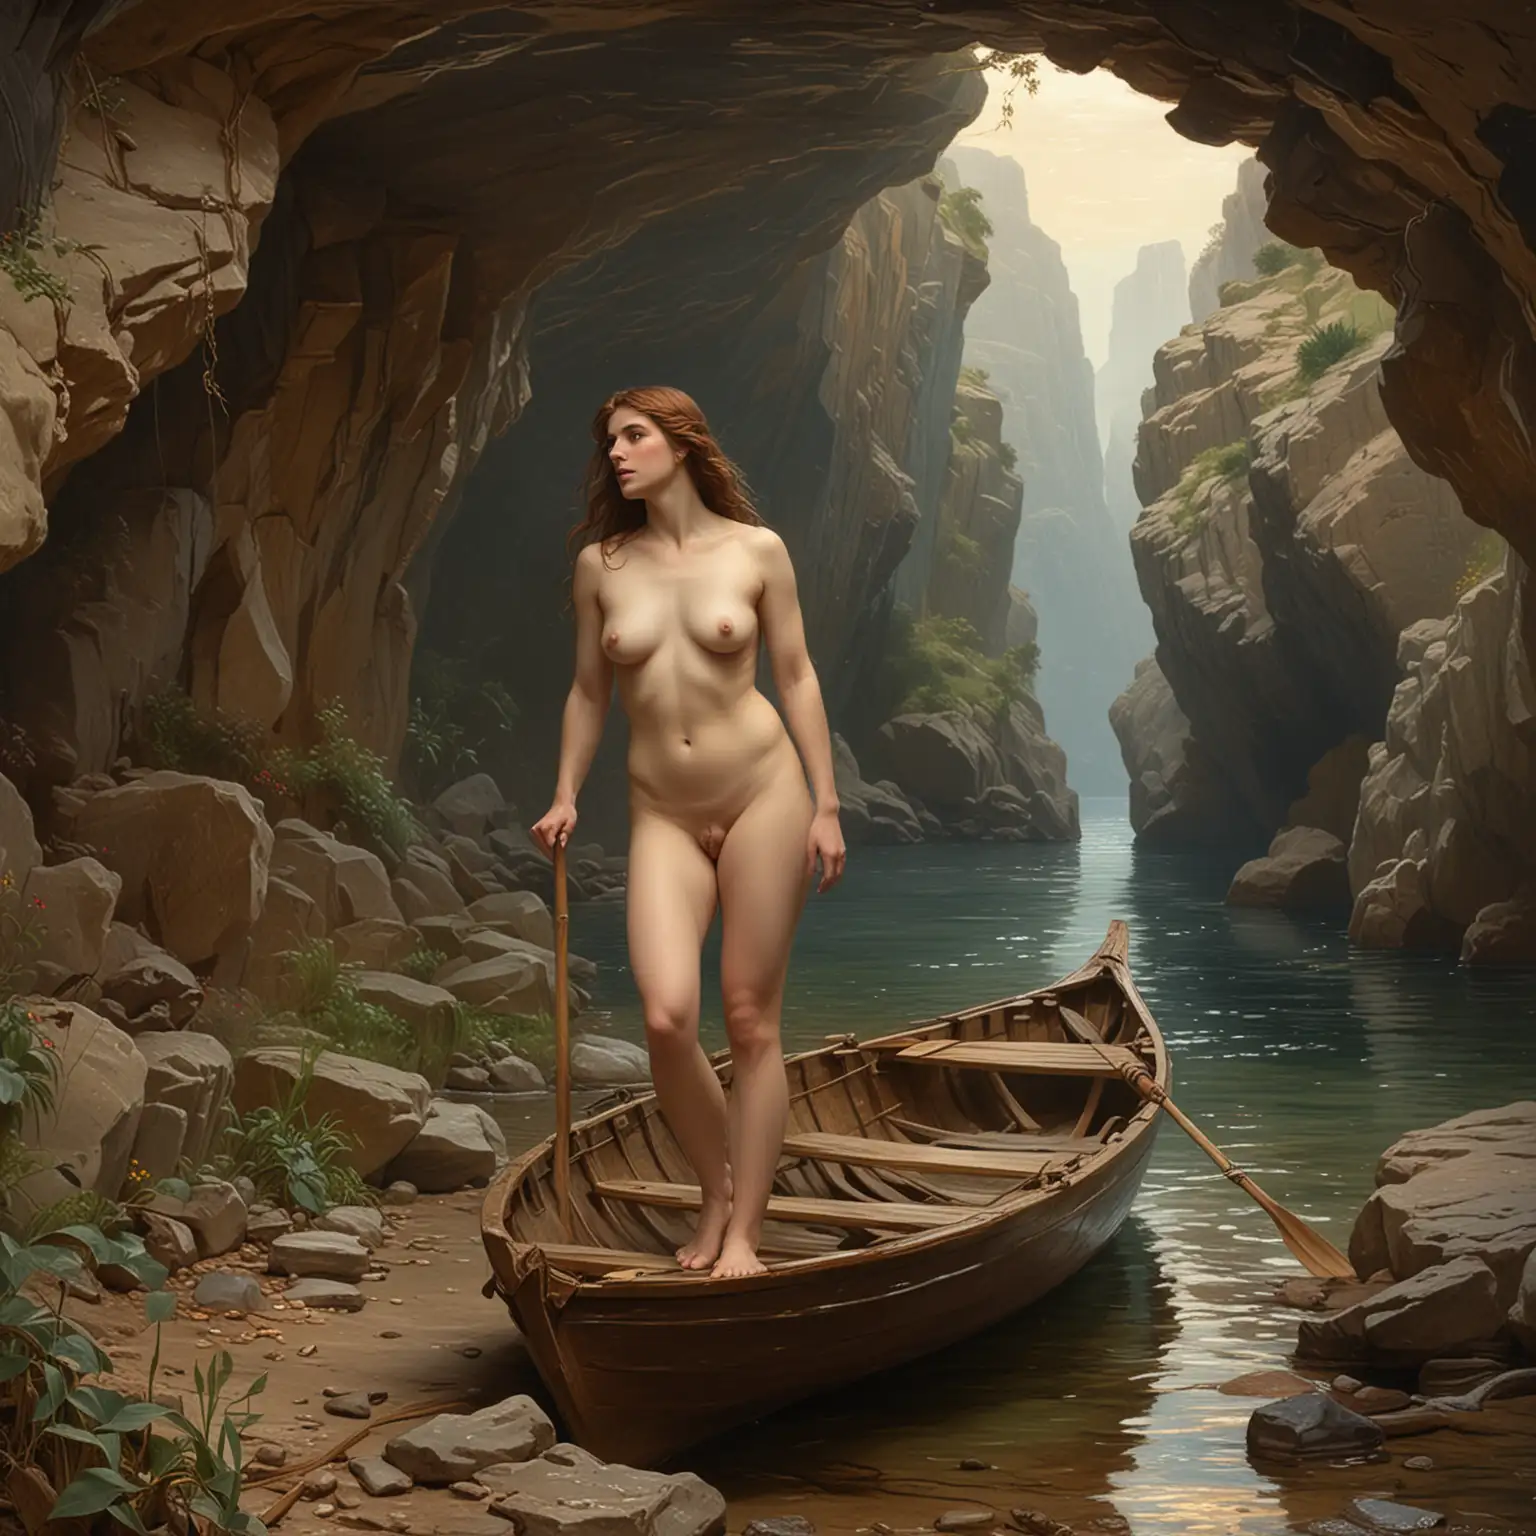 the nude female muse Calypso is standing on the ground in a cave.  She is looking down at the handsome man Odysseus who is rowing a boat to leave, envisioned in the artistic style of the renowned British painter, Sir John William Waterhouse